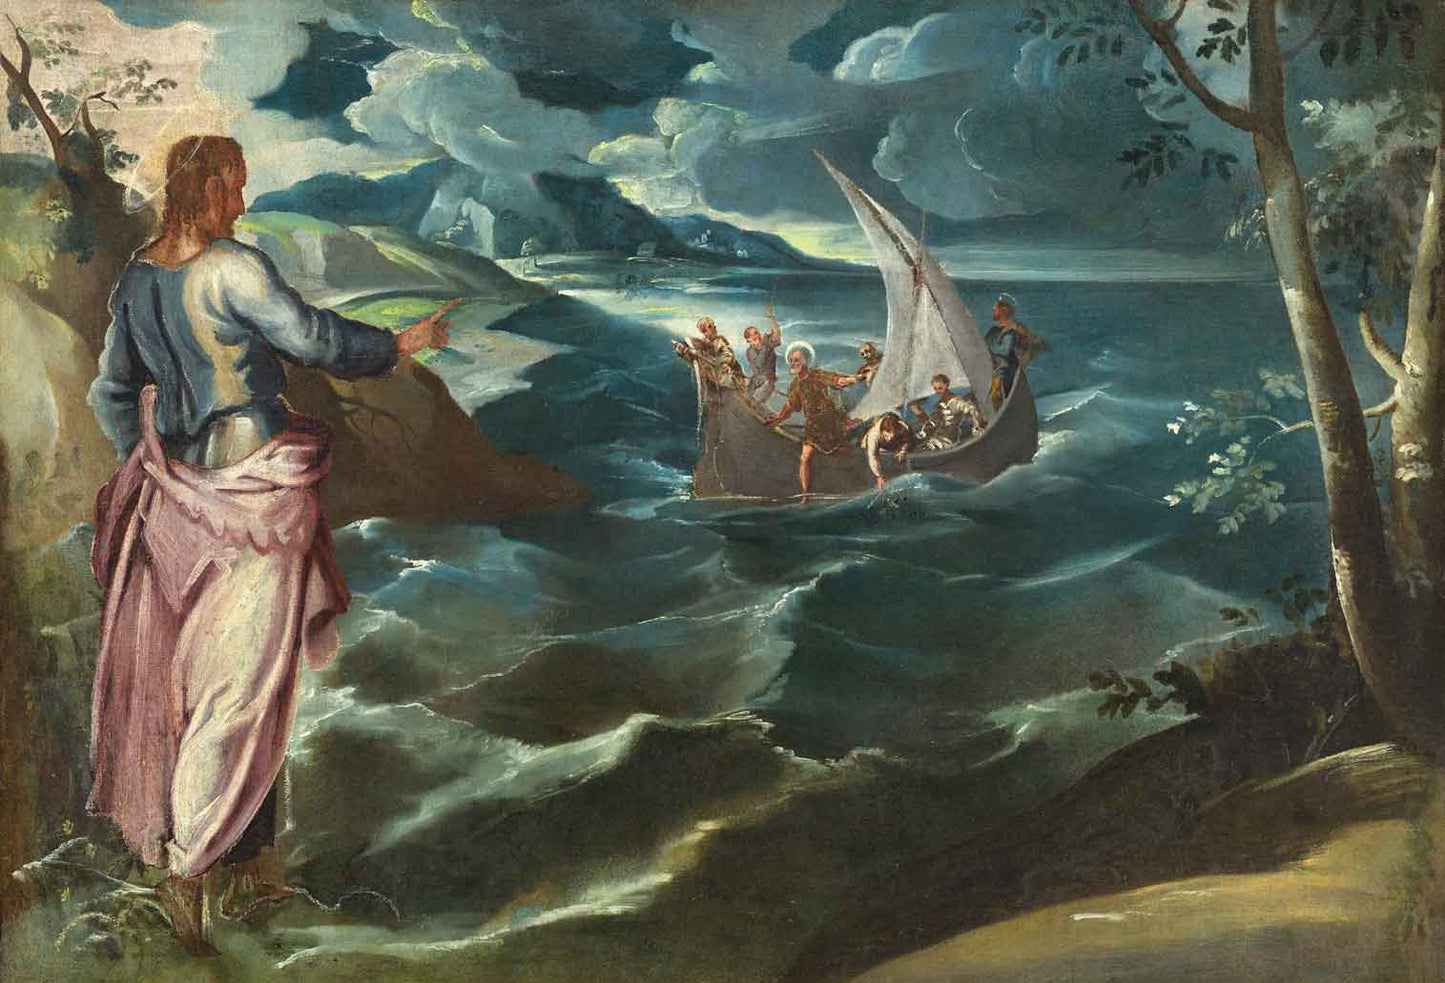 Christ at the Sea of Galilee